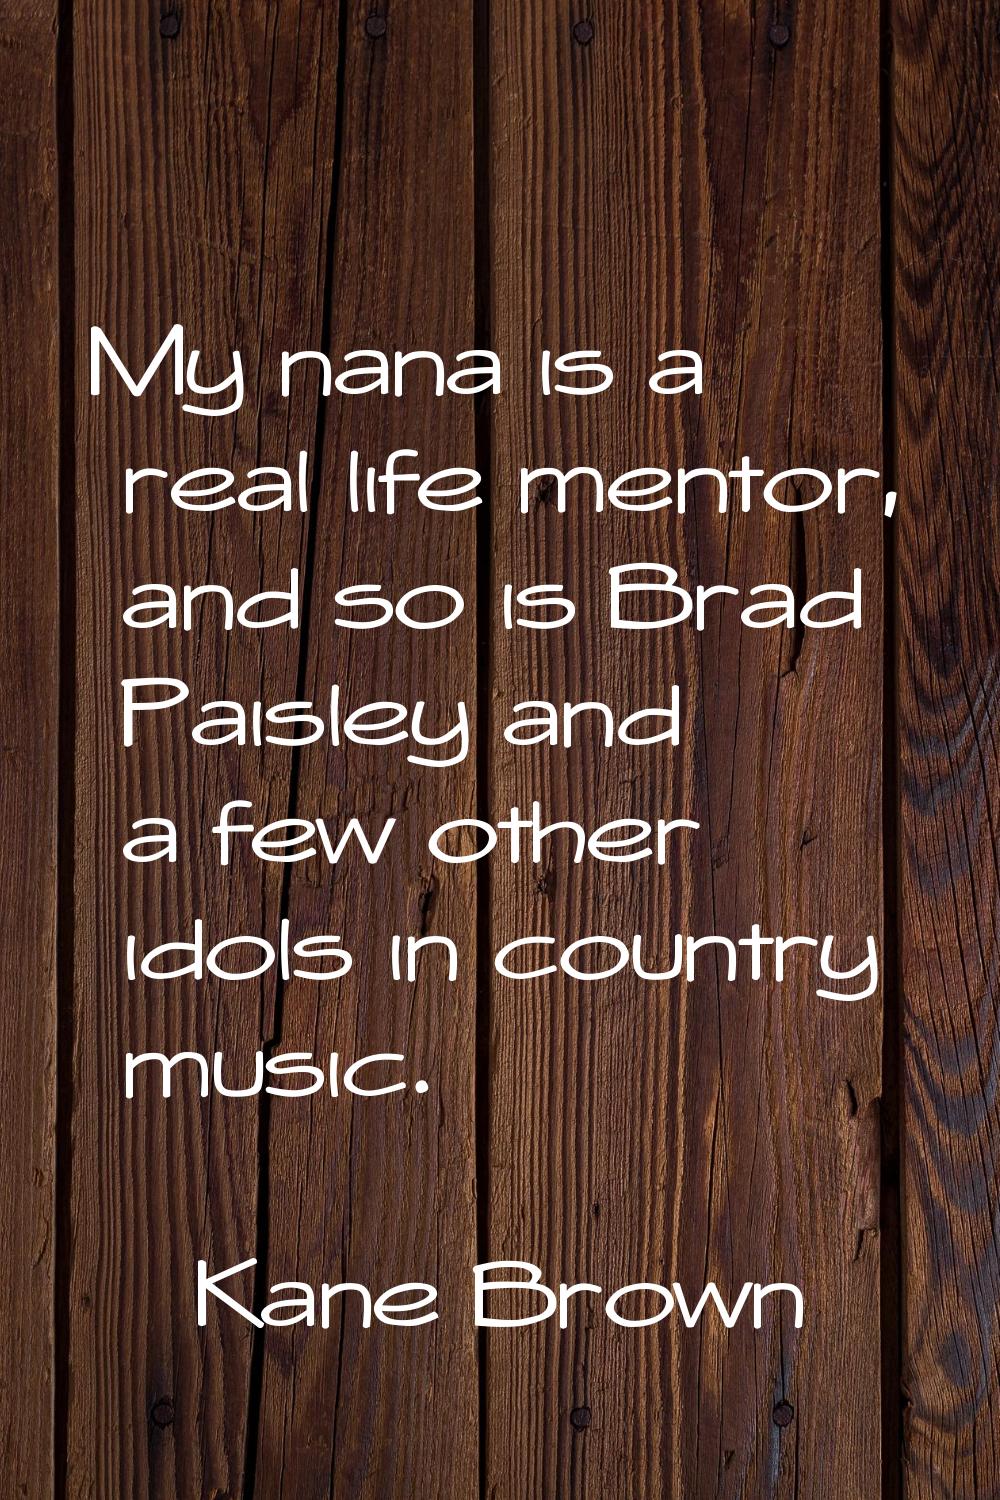 My nana is a real life mentor, and so is Brad Paisley and a few other idols in country music.